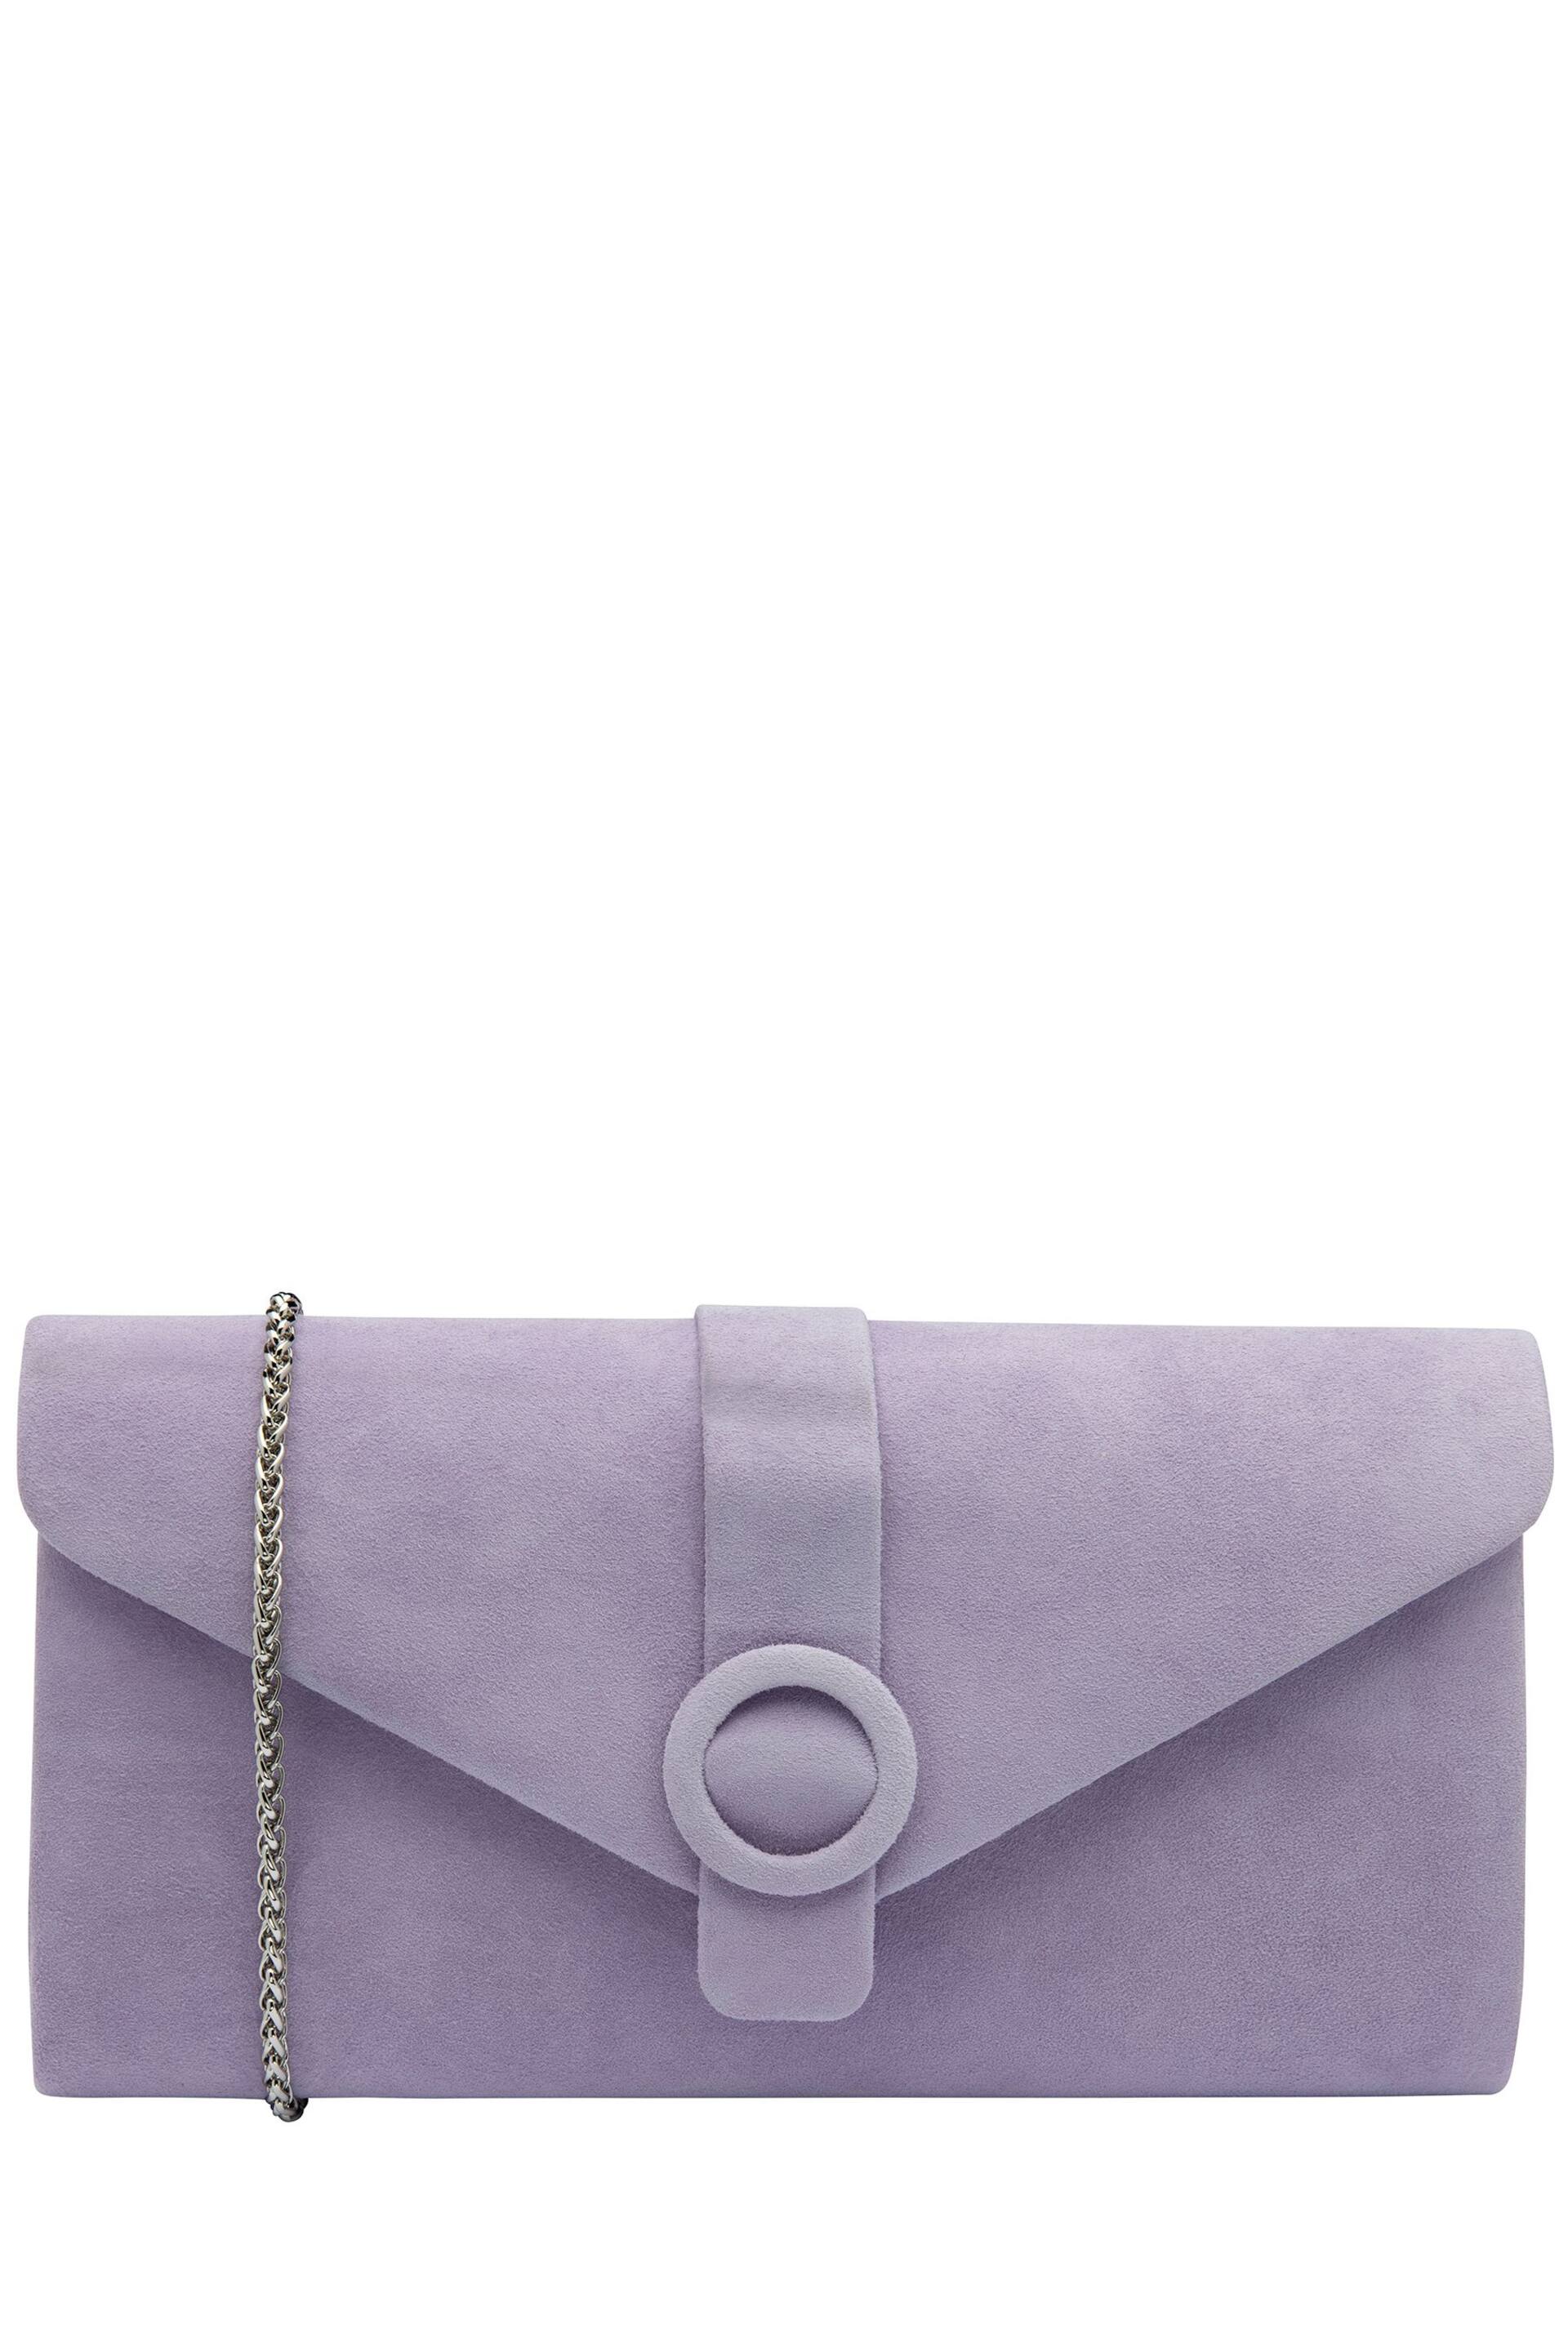 Lotus Purple Clutch Bag With Chain - Image 1 of 4